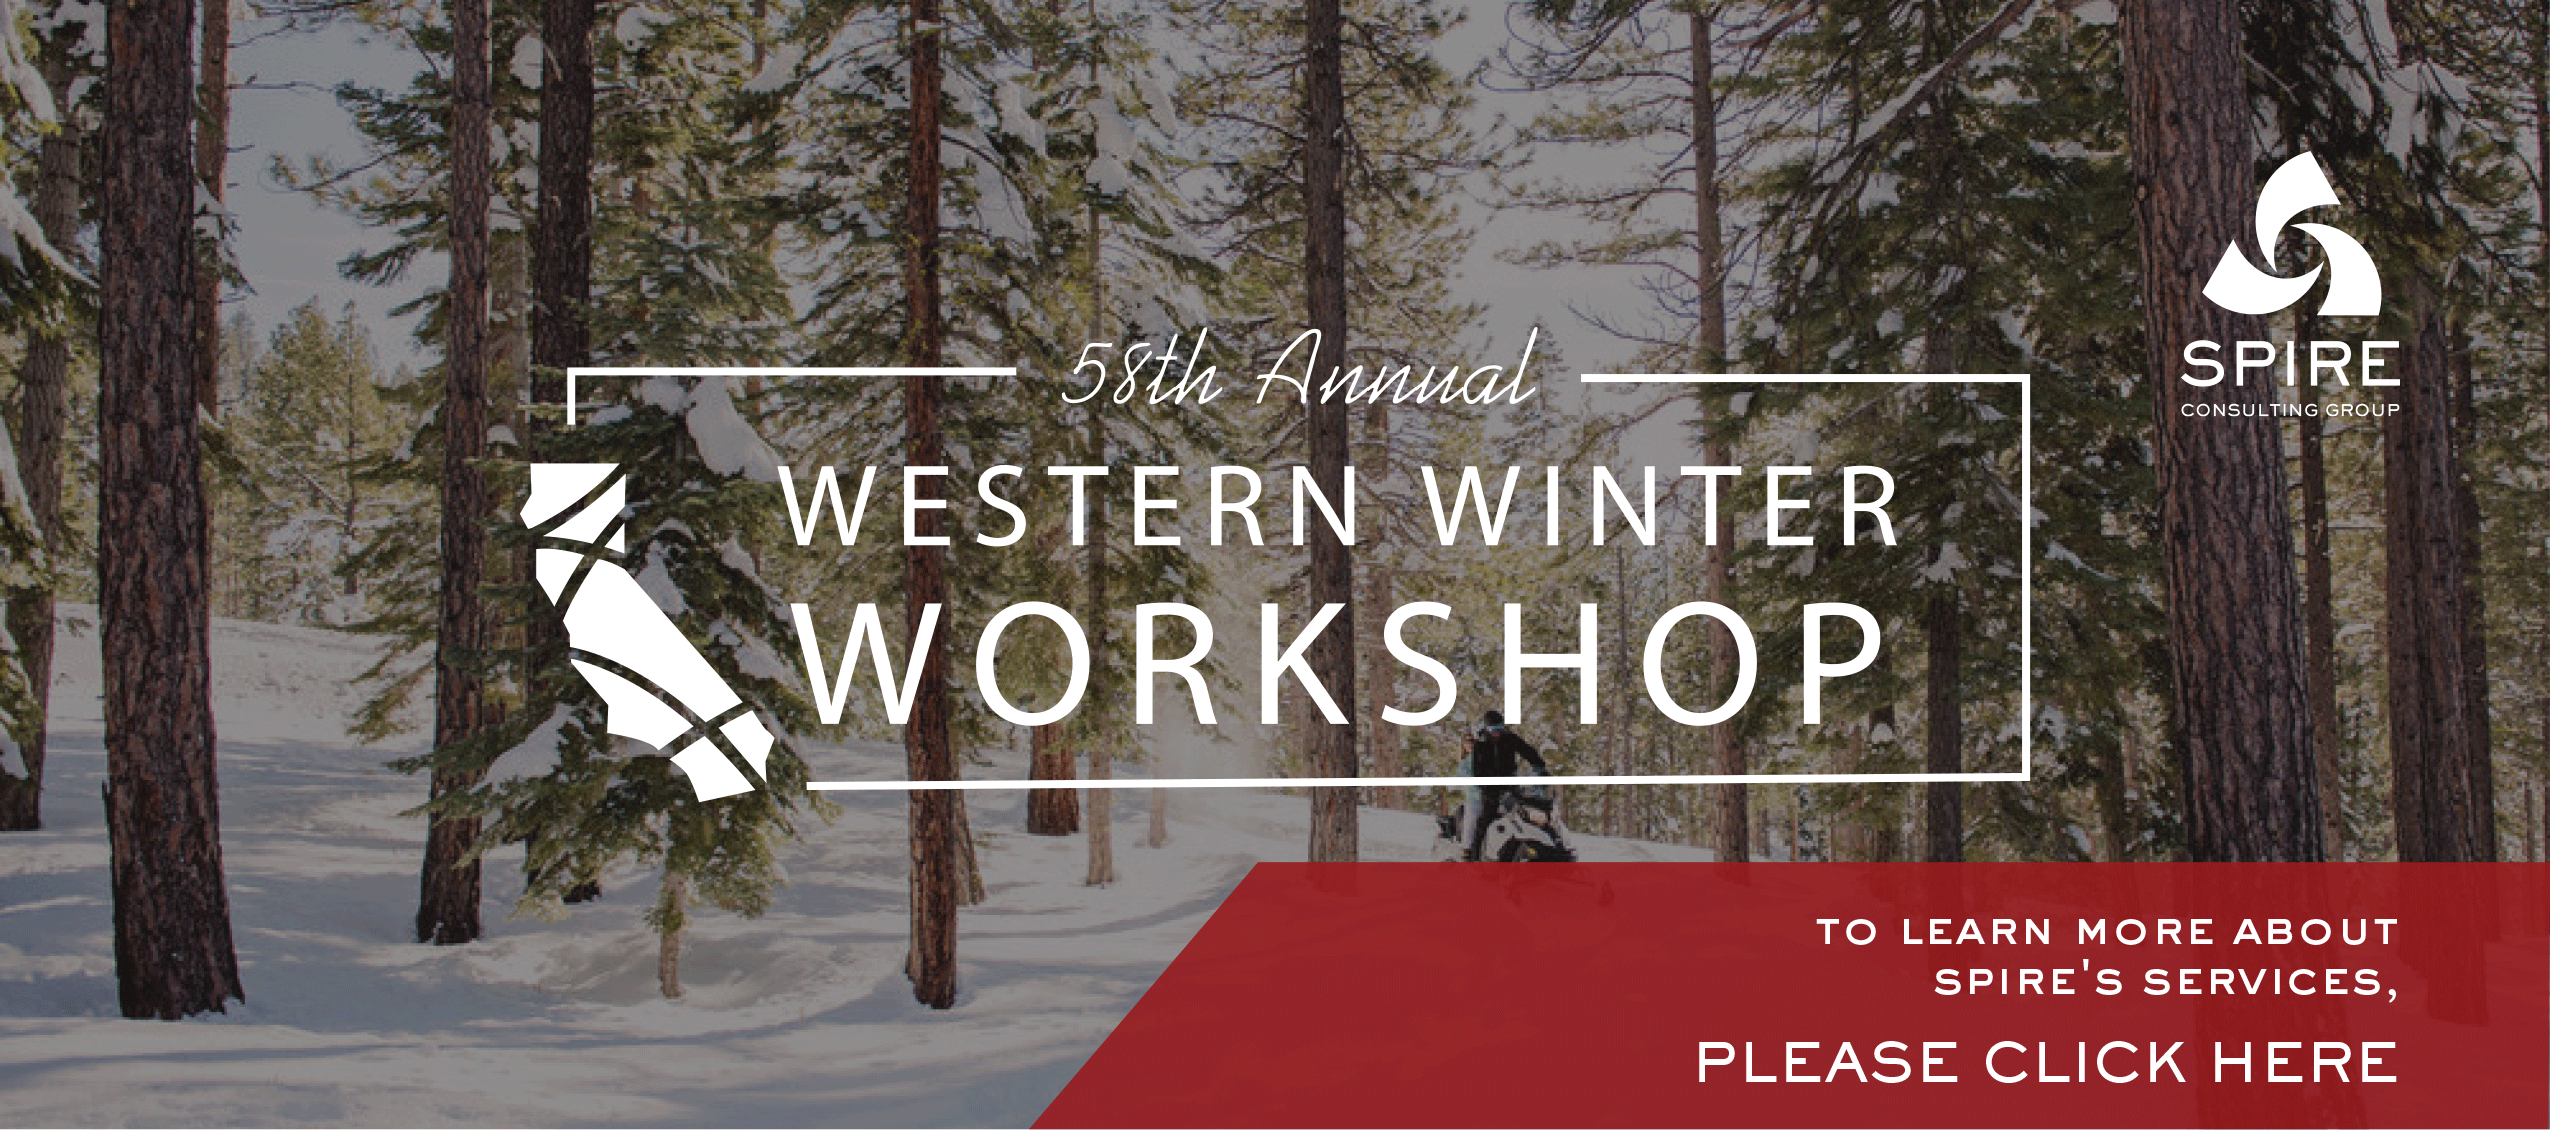 AACE 58th annual western winter workshop